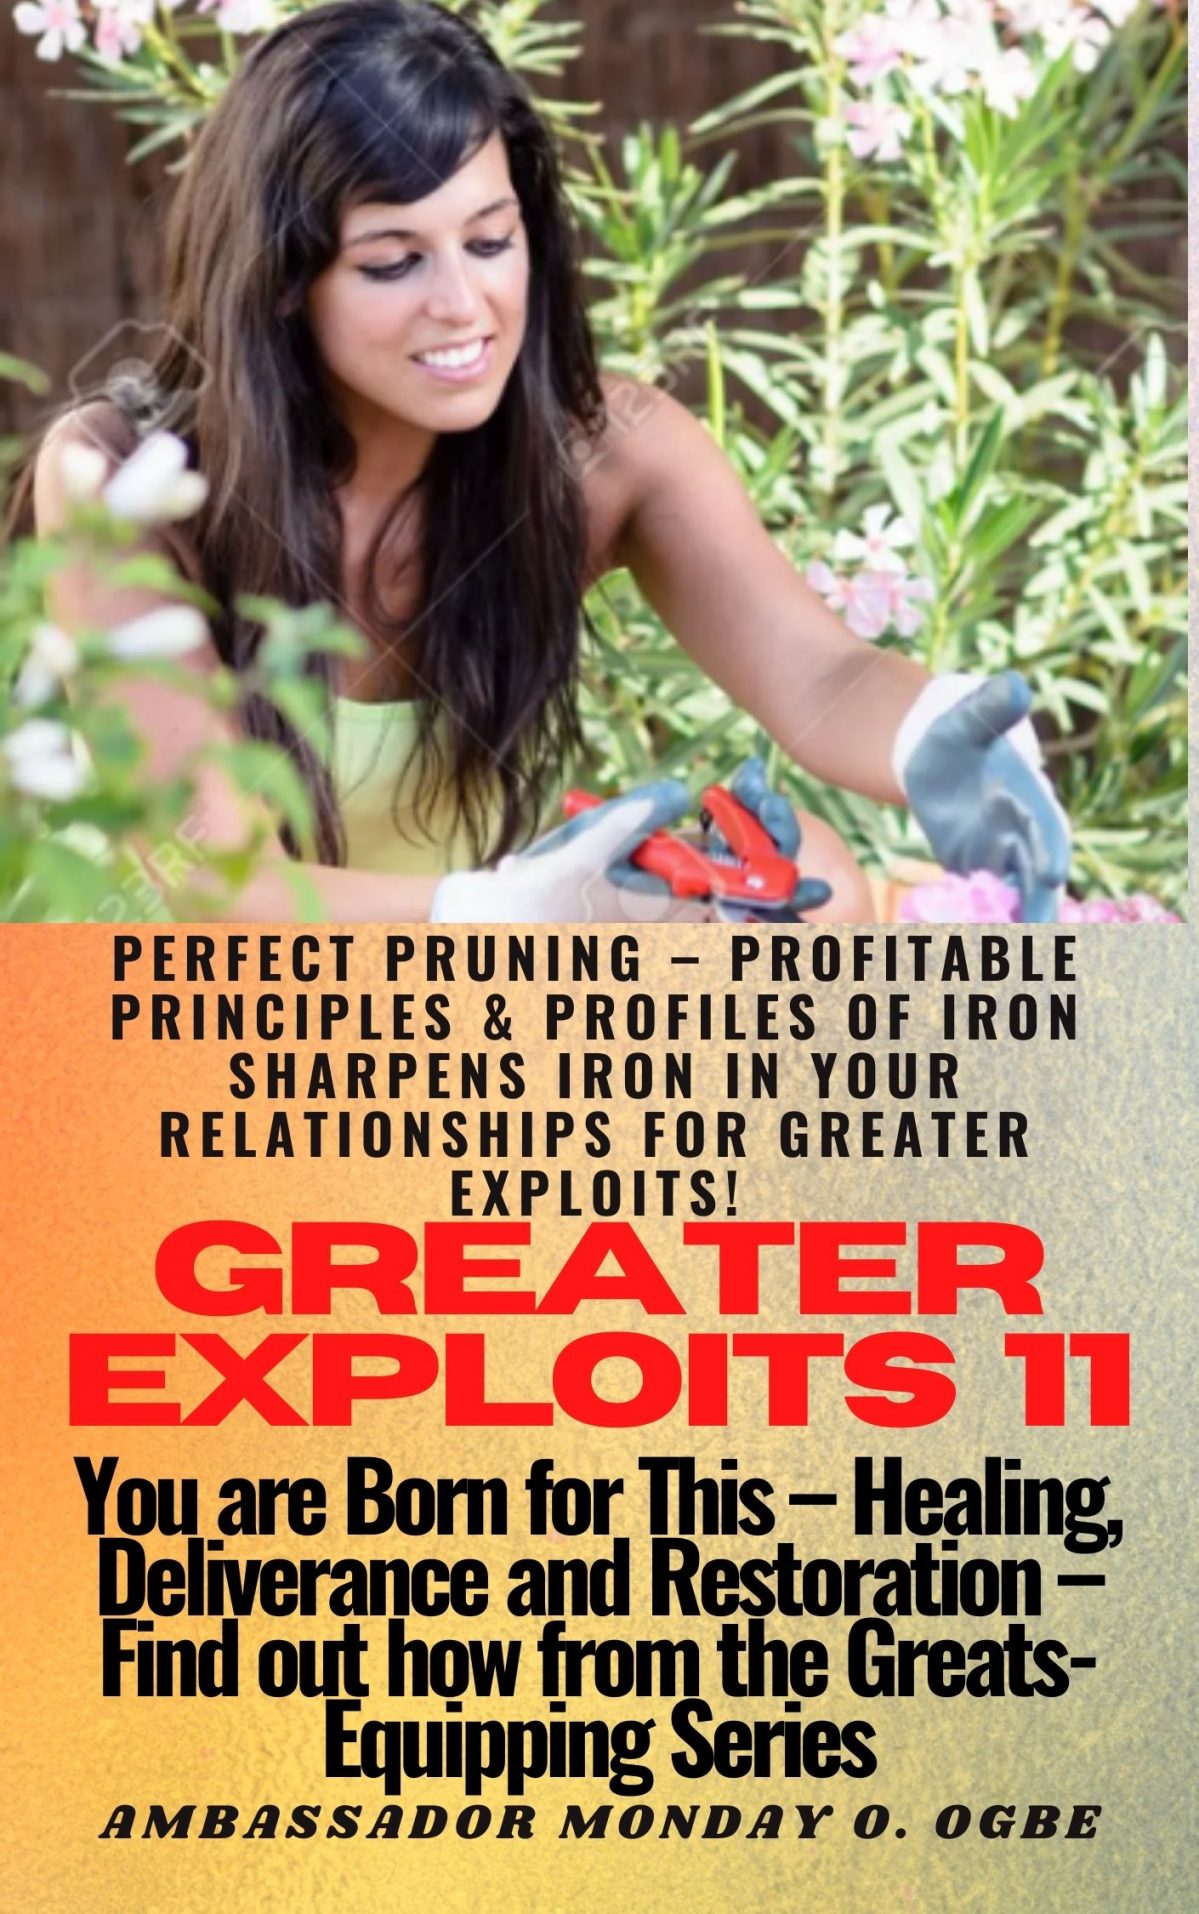 Greater Exploits – 11 Perfect Pruning – Profitable Principles & Profiles of Iron Sharpens Iron in your RELATIONSHIPS for greater Exploits! - You are Born for This – Healing, Deliverance and Restoration – Equipping Series By Ambassador Monday O. Ogbe